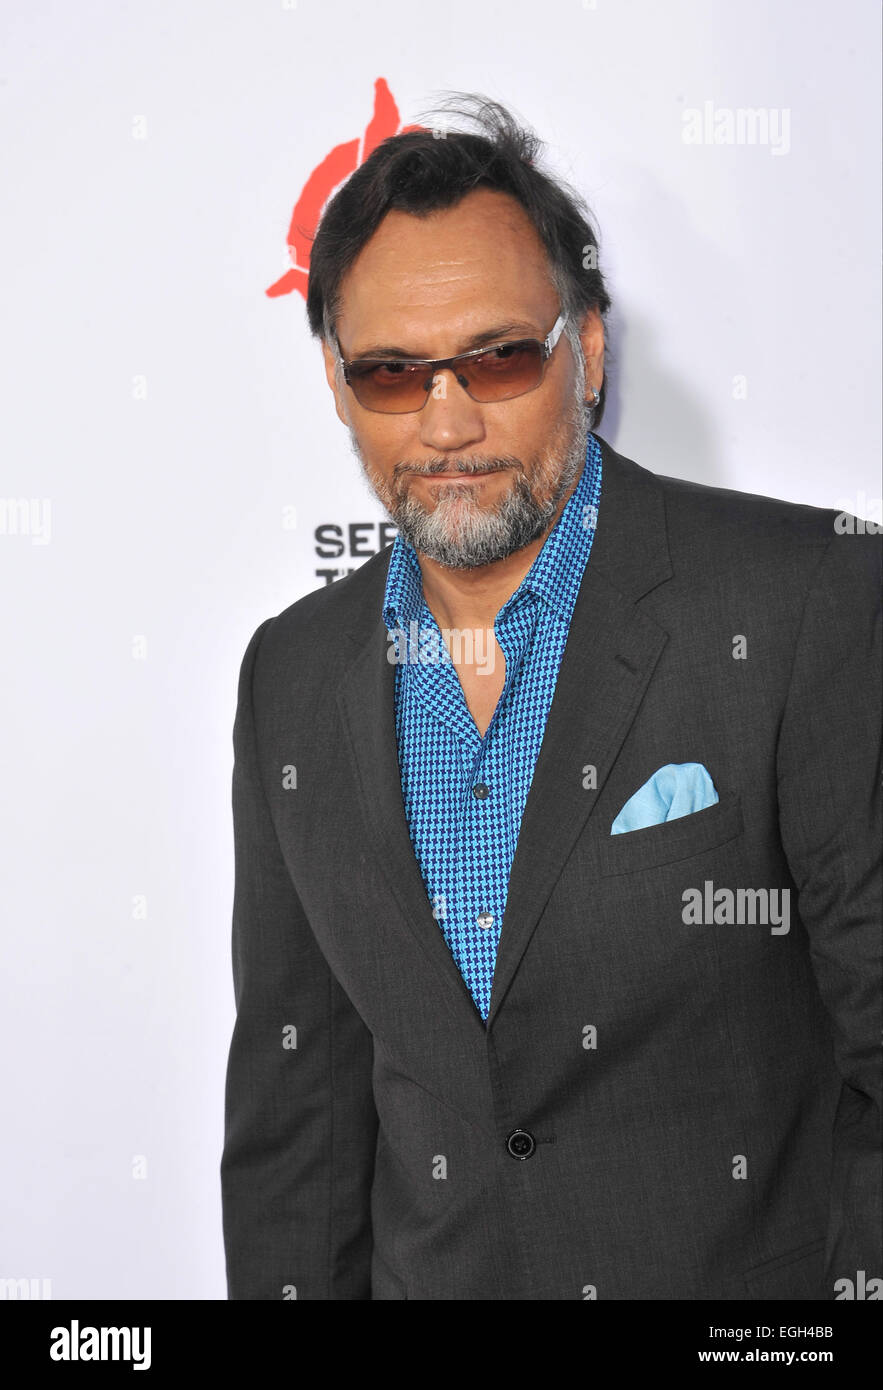 LOS ANGELES, CA - SEPTEMBER 7, 2013: Jimmy Smits at the season 6 premiere of 'Sons of Anarchy' at the Dolby Theatre, Hollywood. Stock Photo